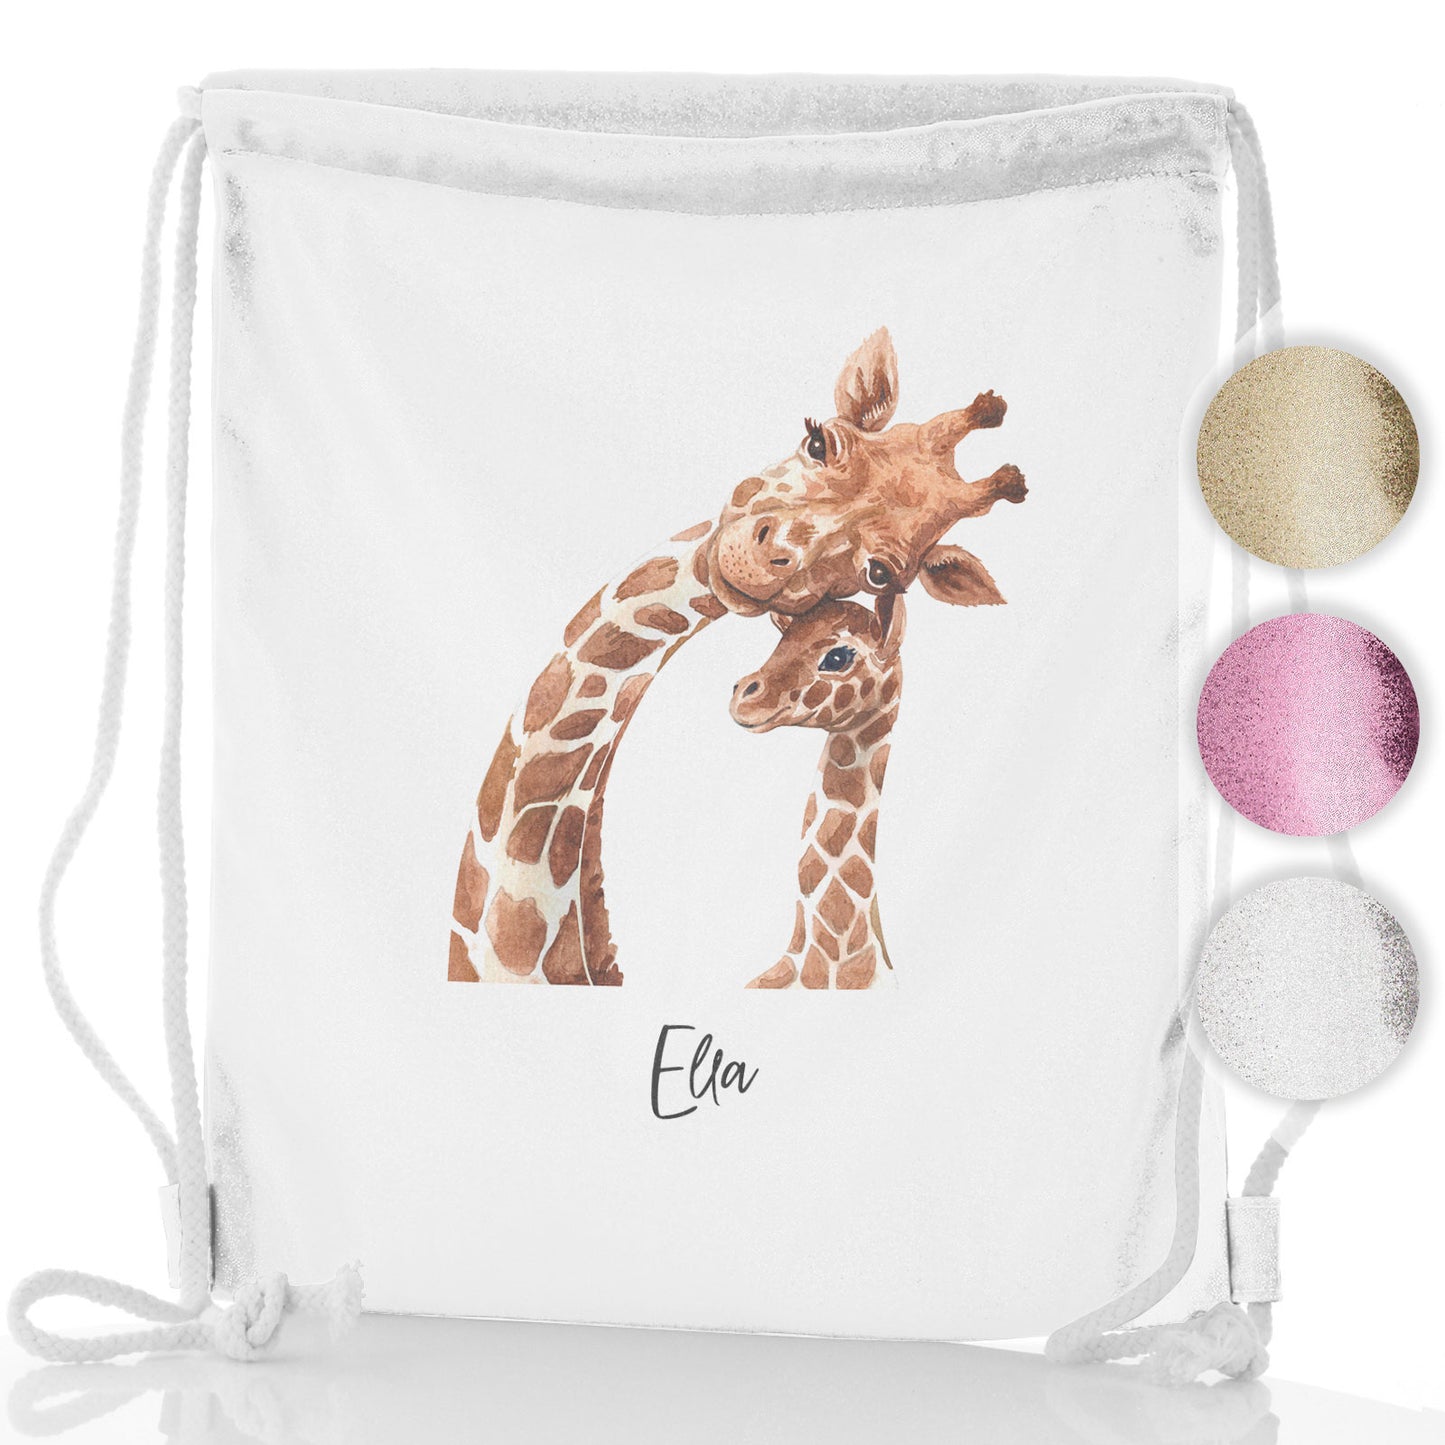 Personalised Glitter Drawstring Backpack with Welcoming Text and Relaxing Mum and Baby Giraffes